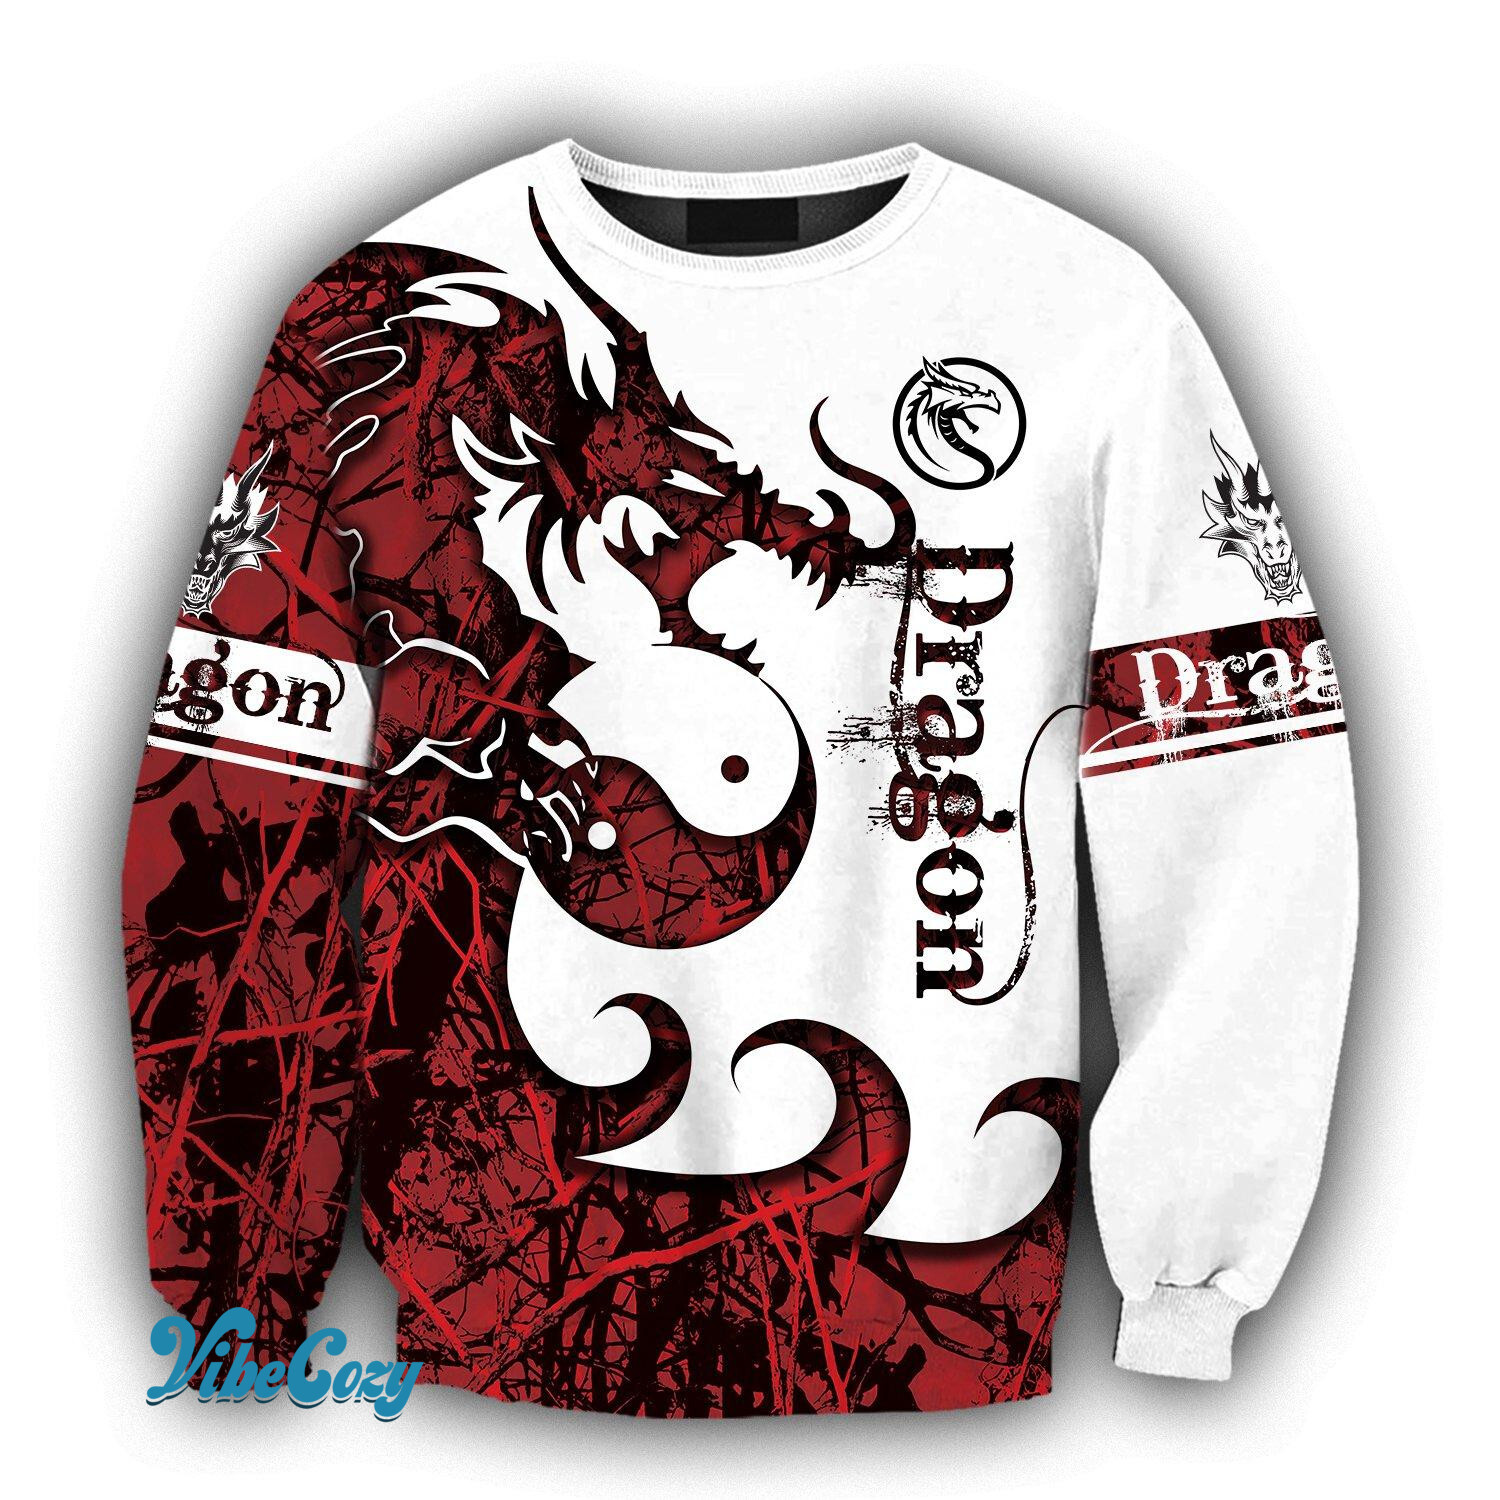 3D Tattoo and Dungeon Dragon Hoodie T Shirt For Men and Women NM050932